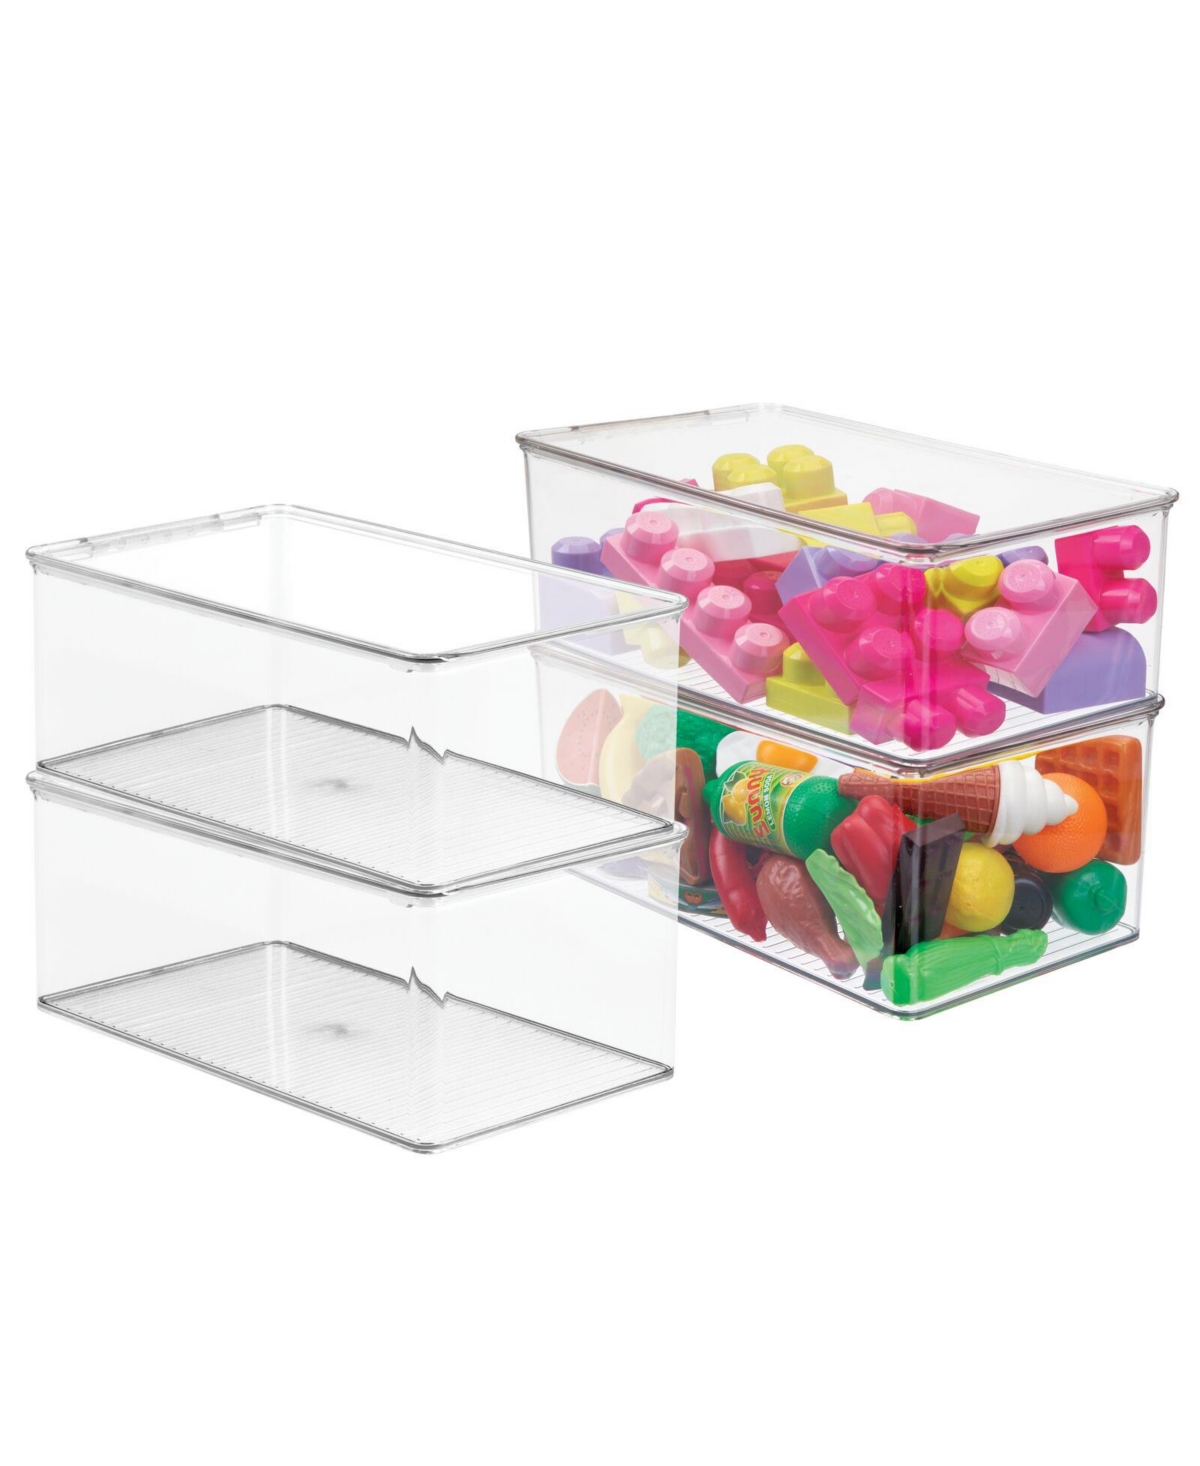 Plastic Stackable Toy Storage Bin Box with Hinge Lid, 4 Pack - Clear - Clear